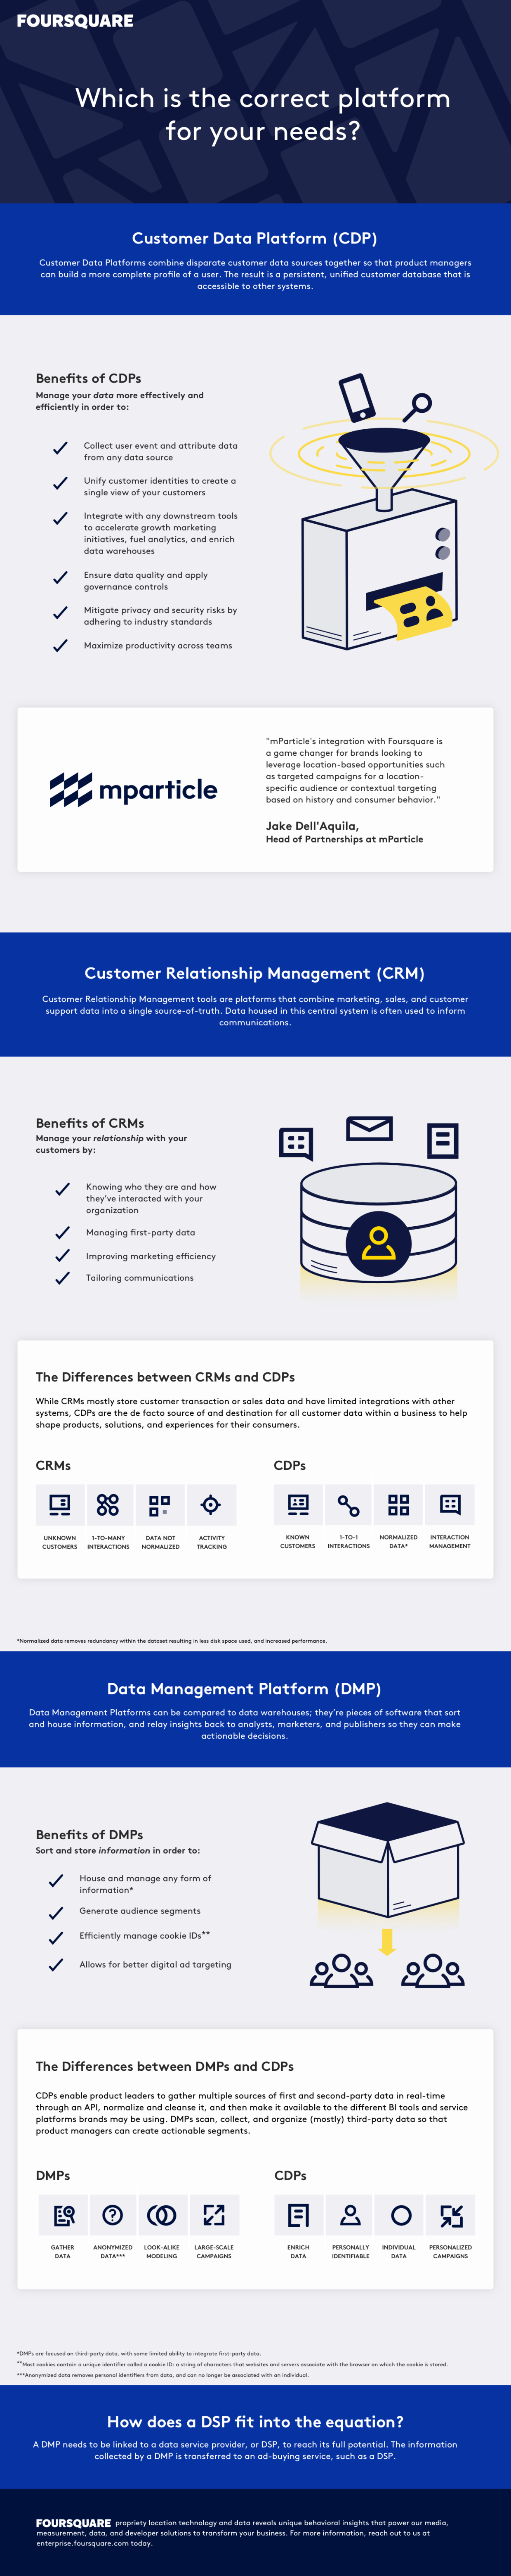 CDP Infographic